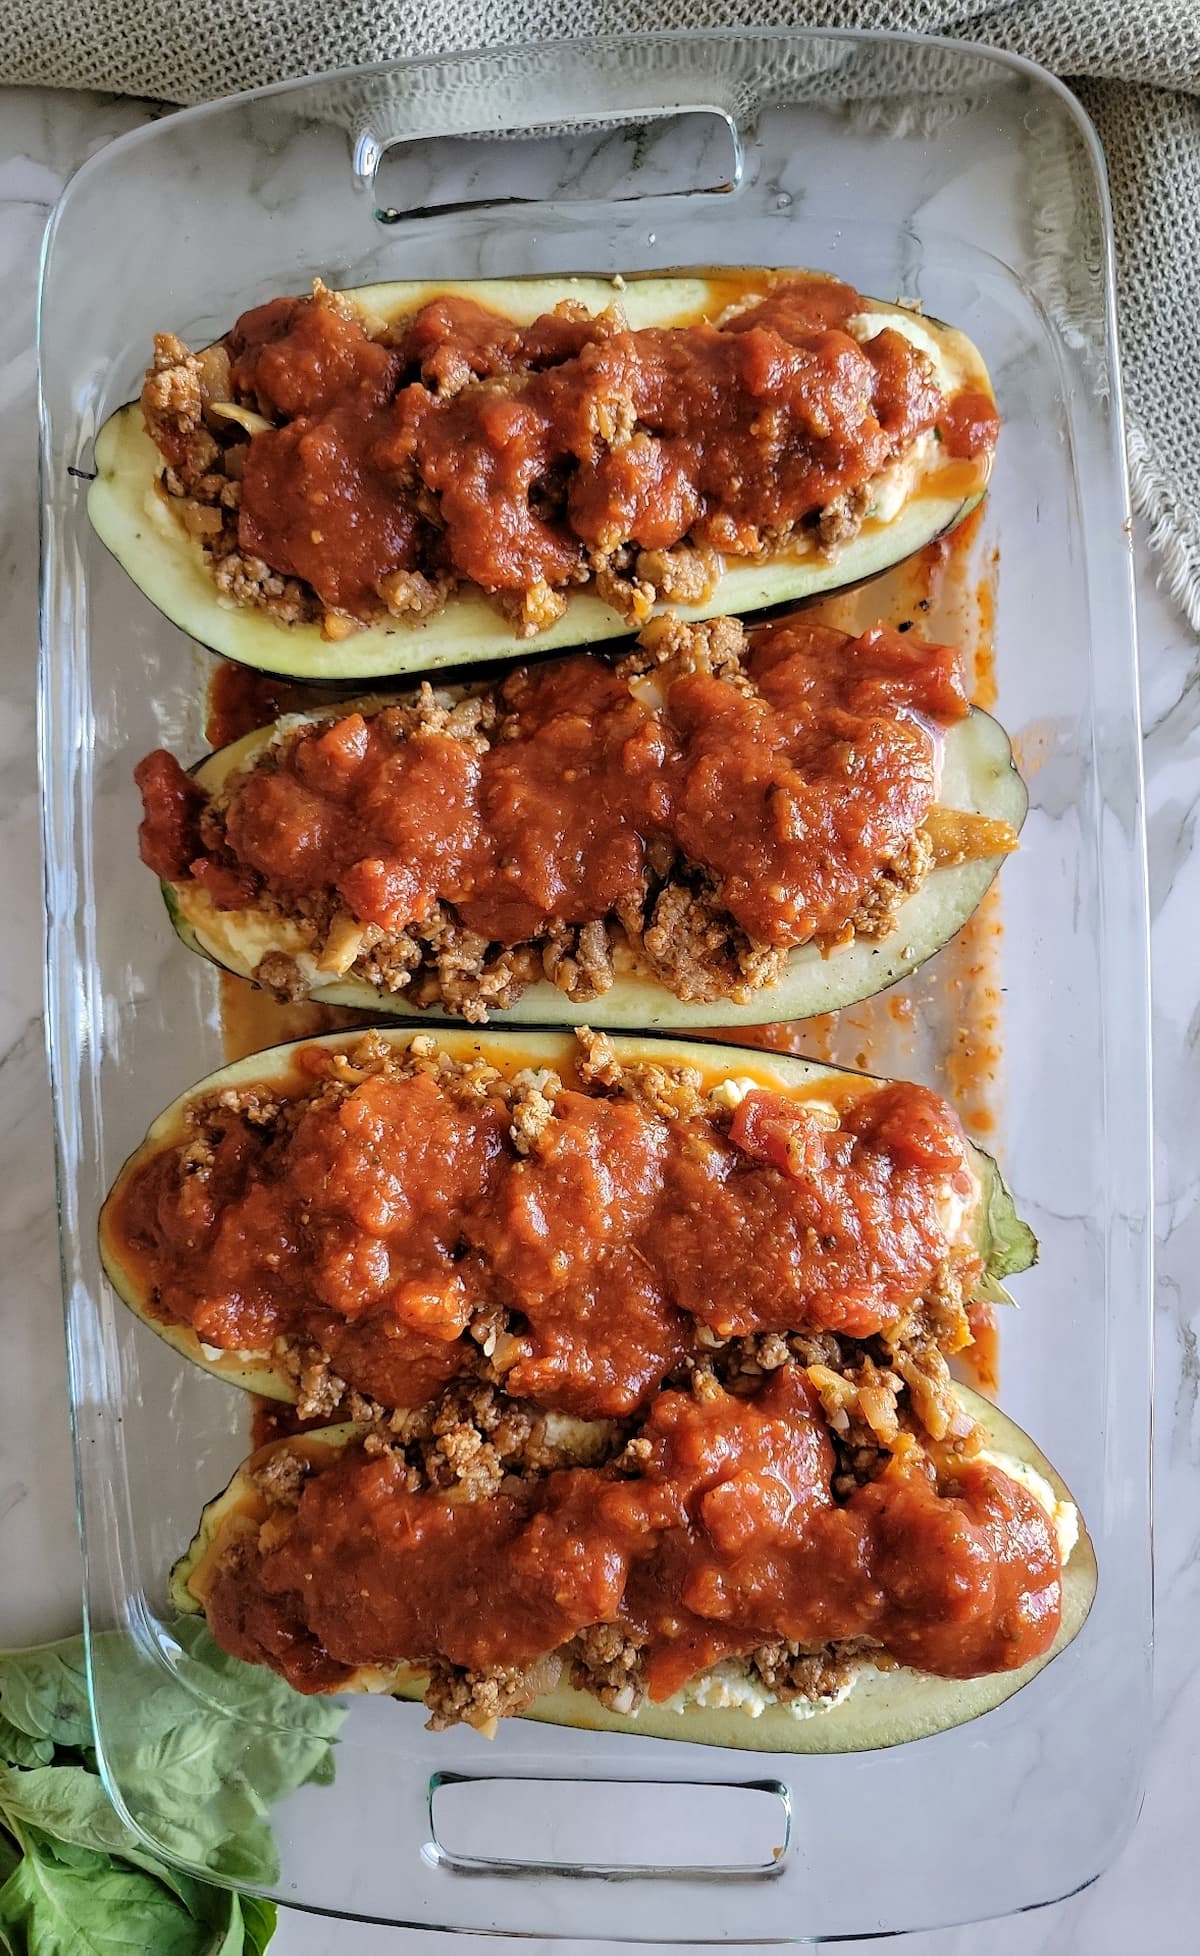 4 eggplant halves filled with tomato sauce and ground beef in a rectangular glass baking dish